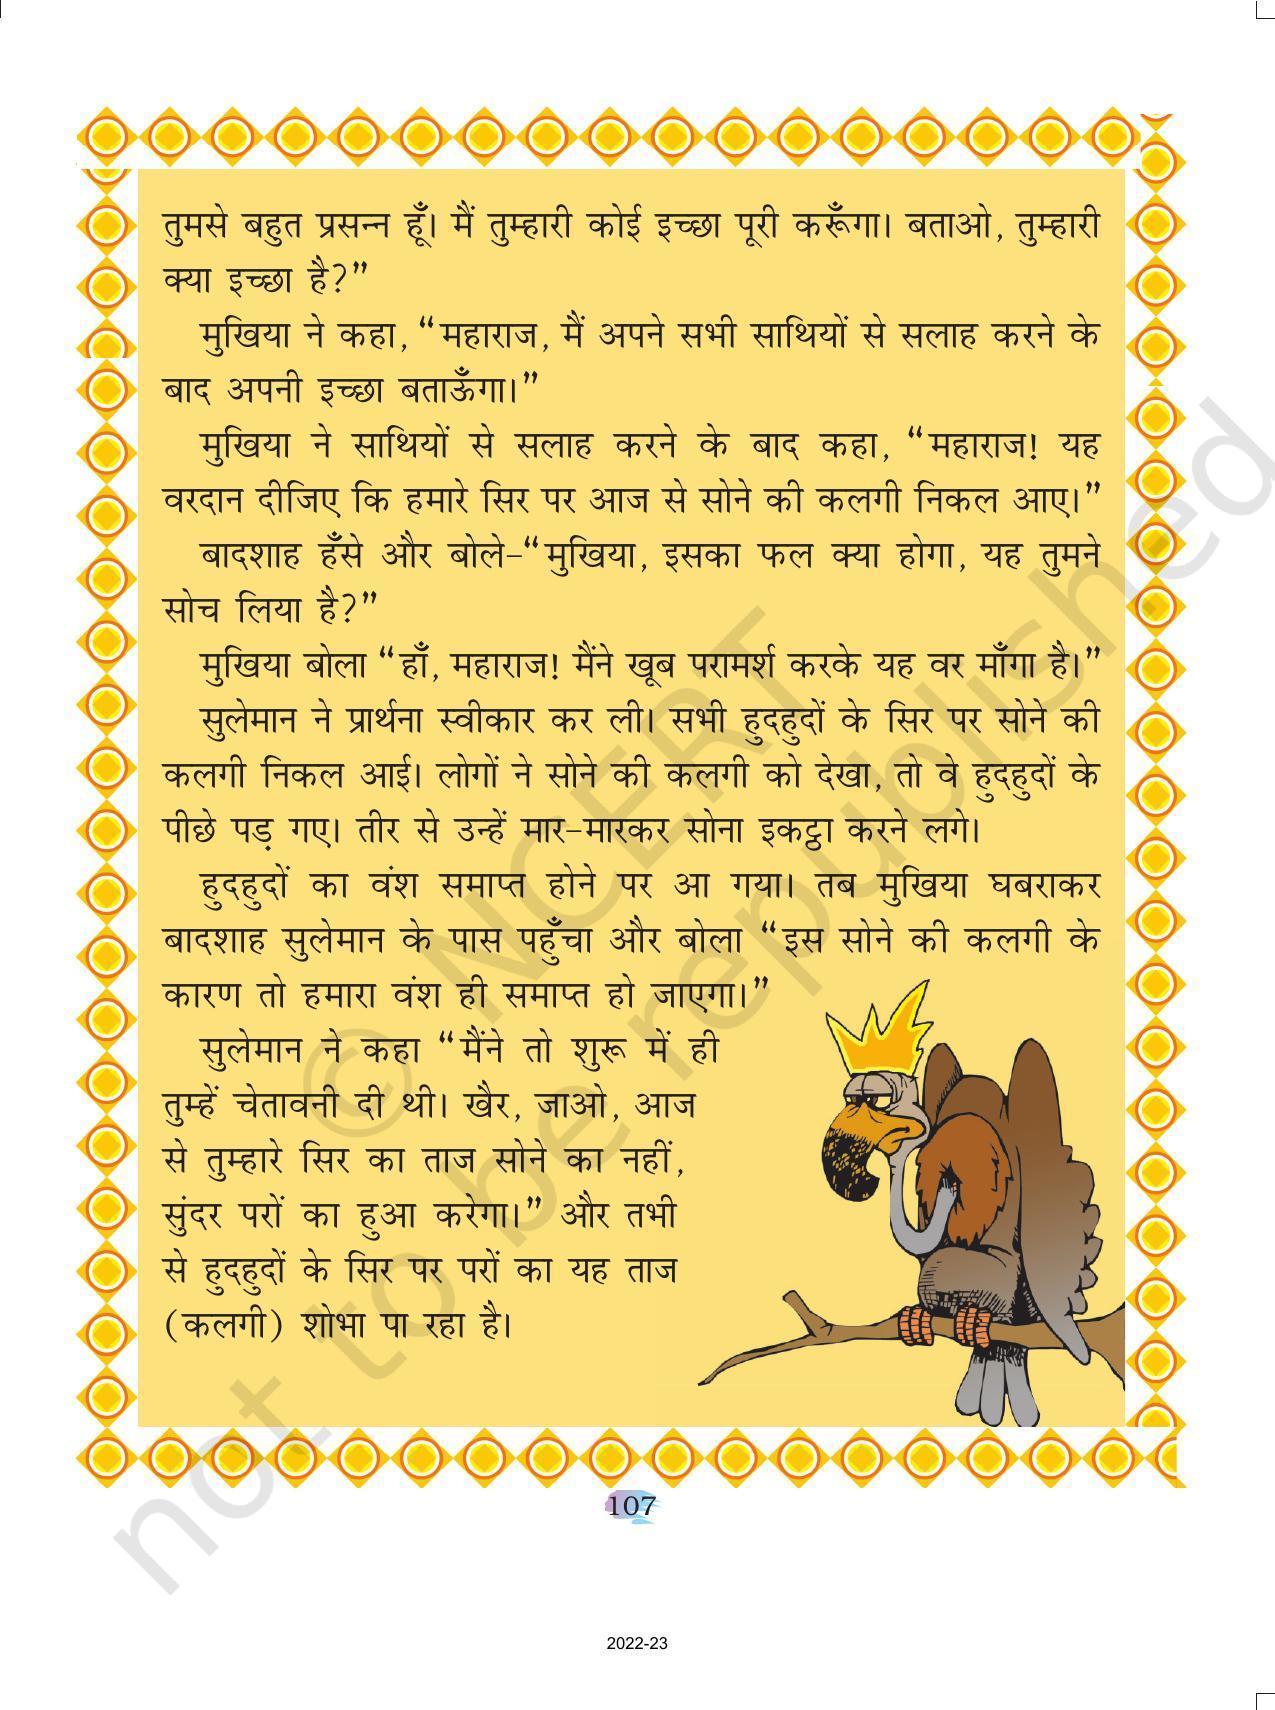 NCERT Book for Class 4 Hindi Chapter 13 हुदहुद - Page 2